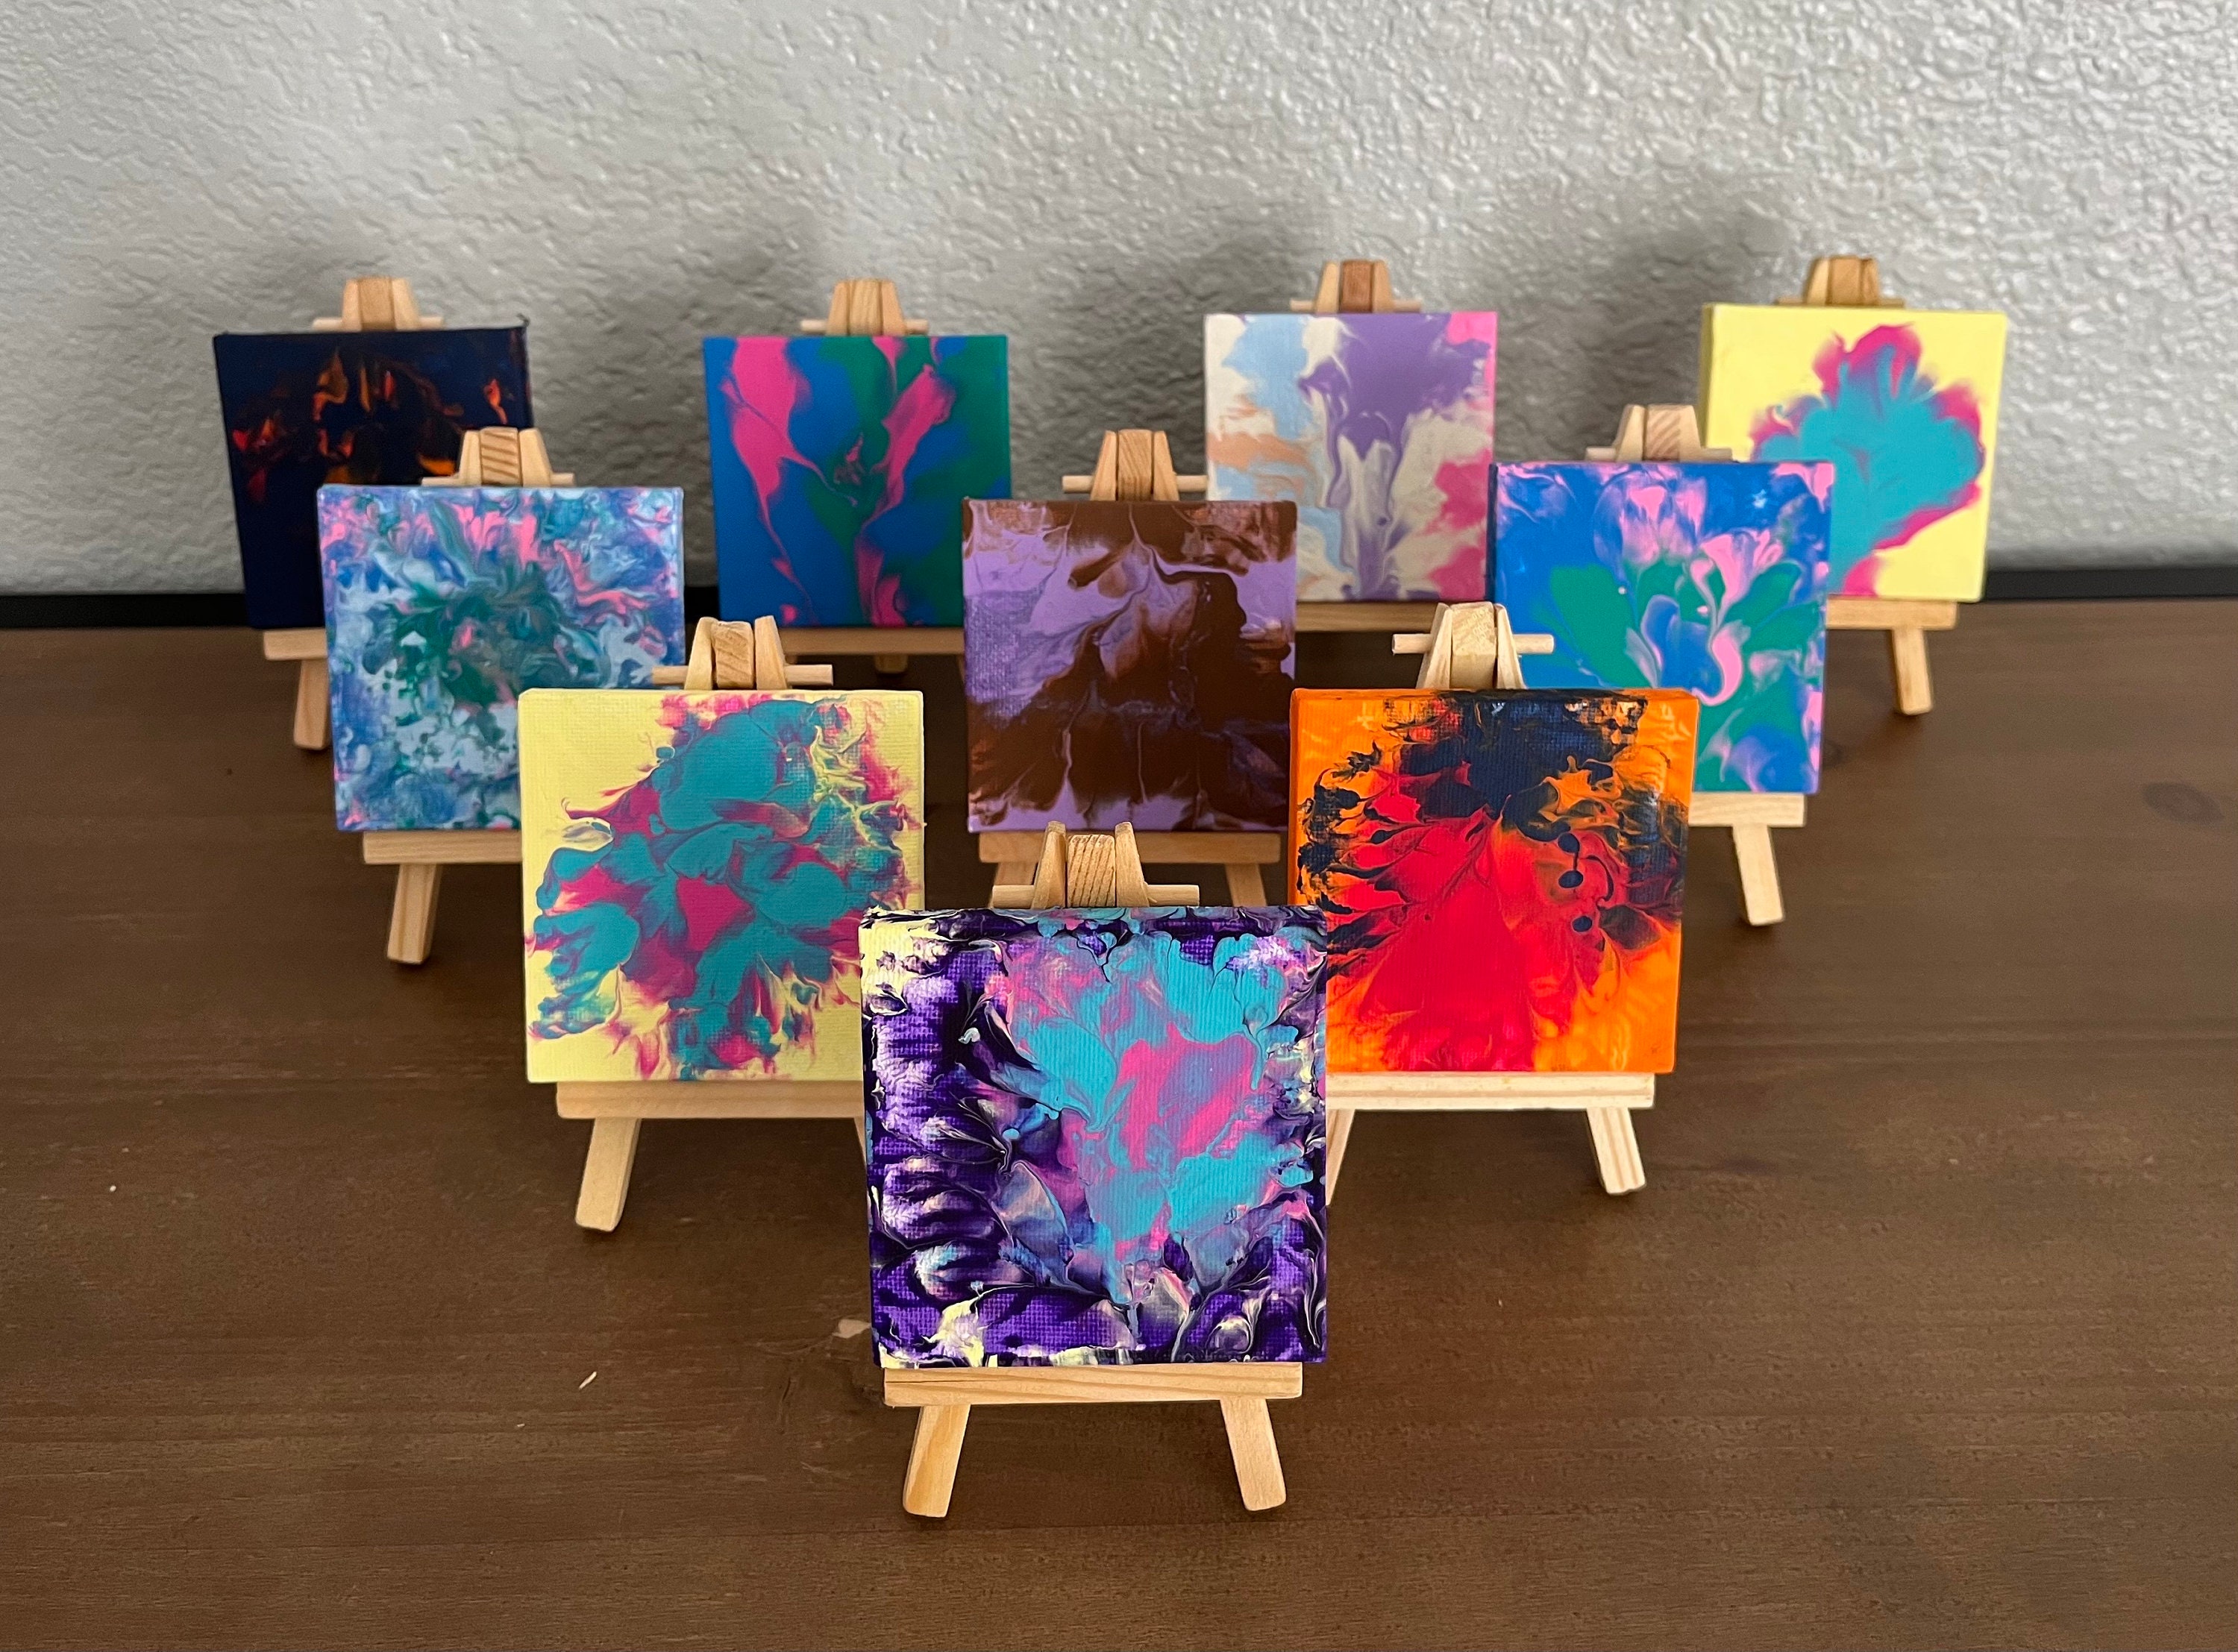 Mini Easel With Canvas (12x16 cm)